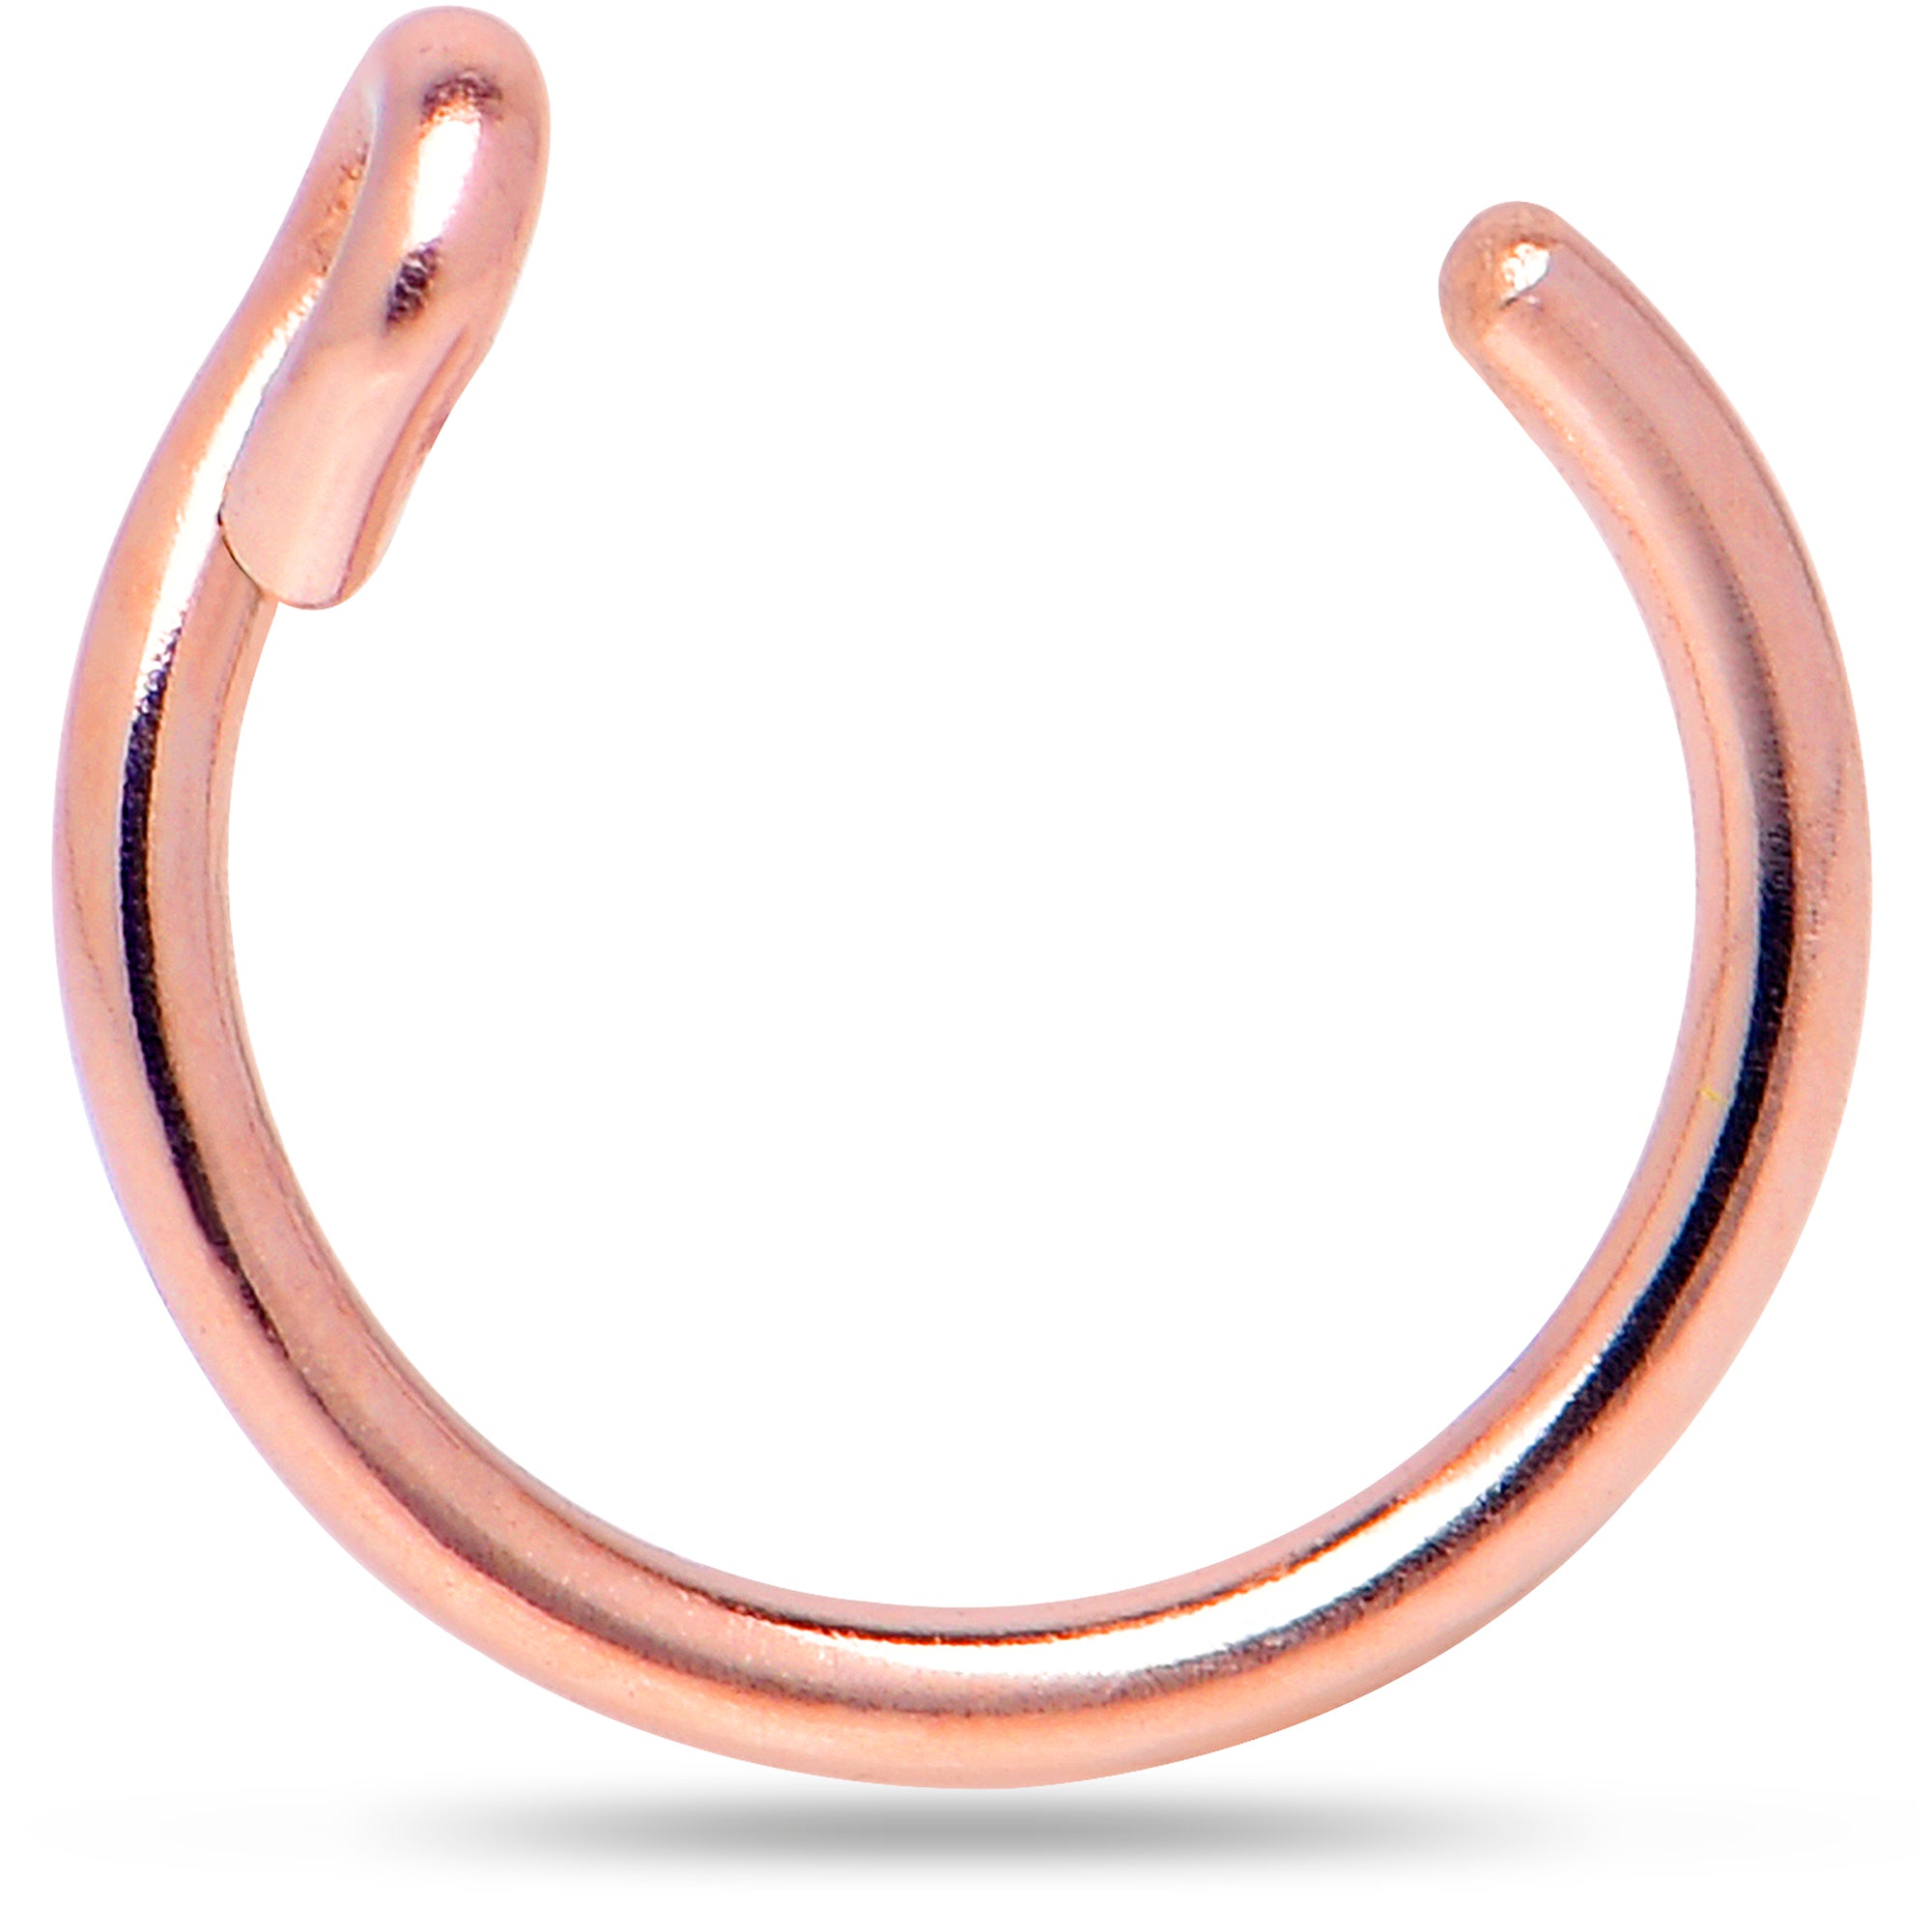 Amazon.com: Fake Nose Ring Hoop 24G - Blue Opal Faux Nose Hoop 925 Silver -  No Piercing Nose Rings For Women Men : Handmade Products